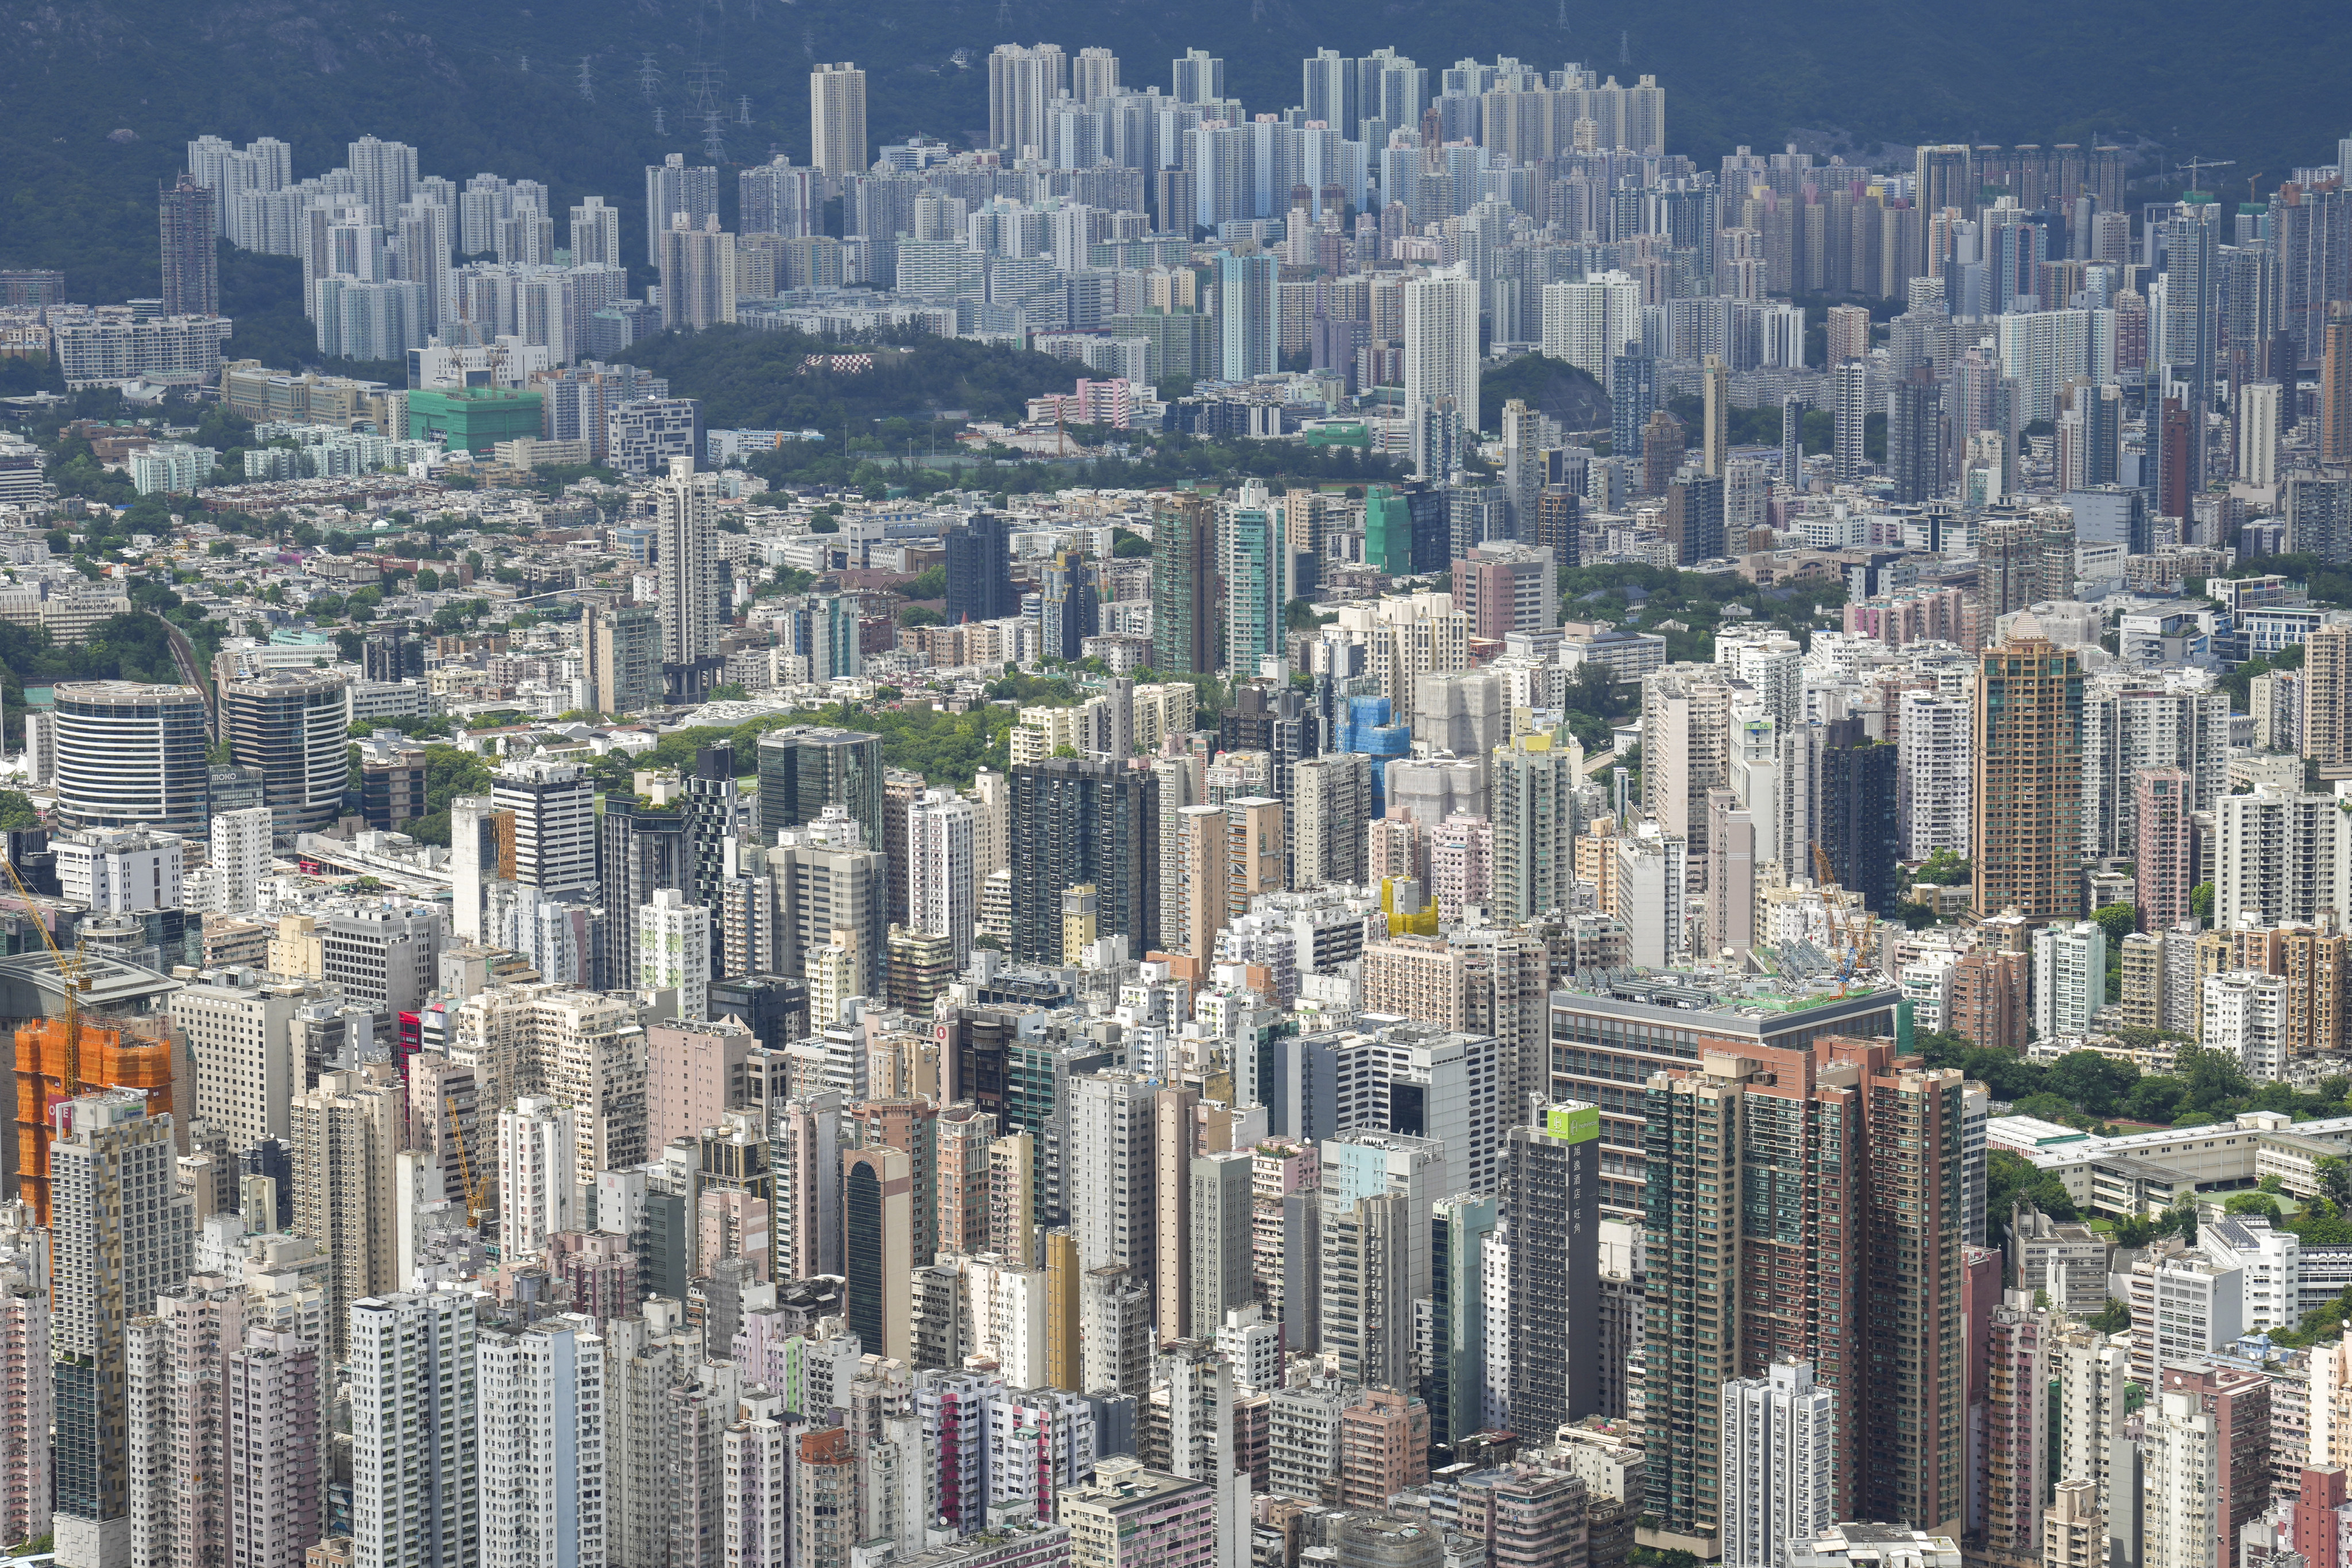 Home prices in Hong Kong are mired in a slump amid elevated interest rates and a poorly performing stock market. Photo: Sam Tsang